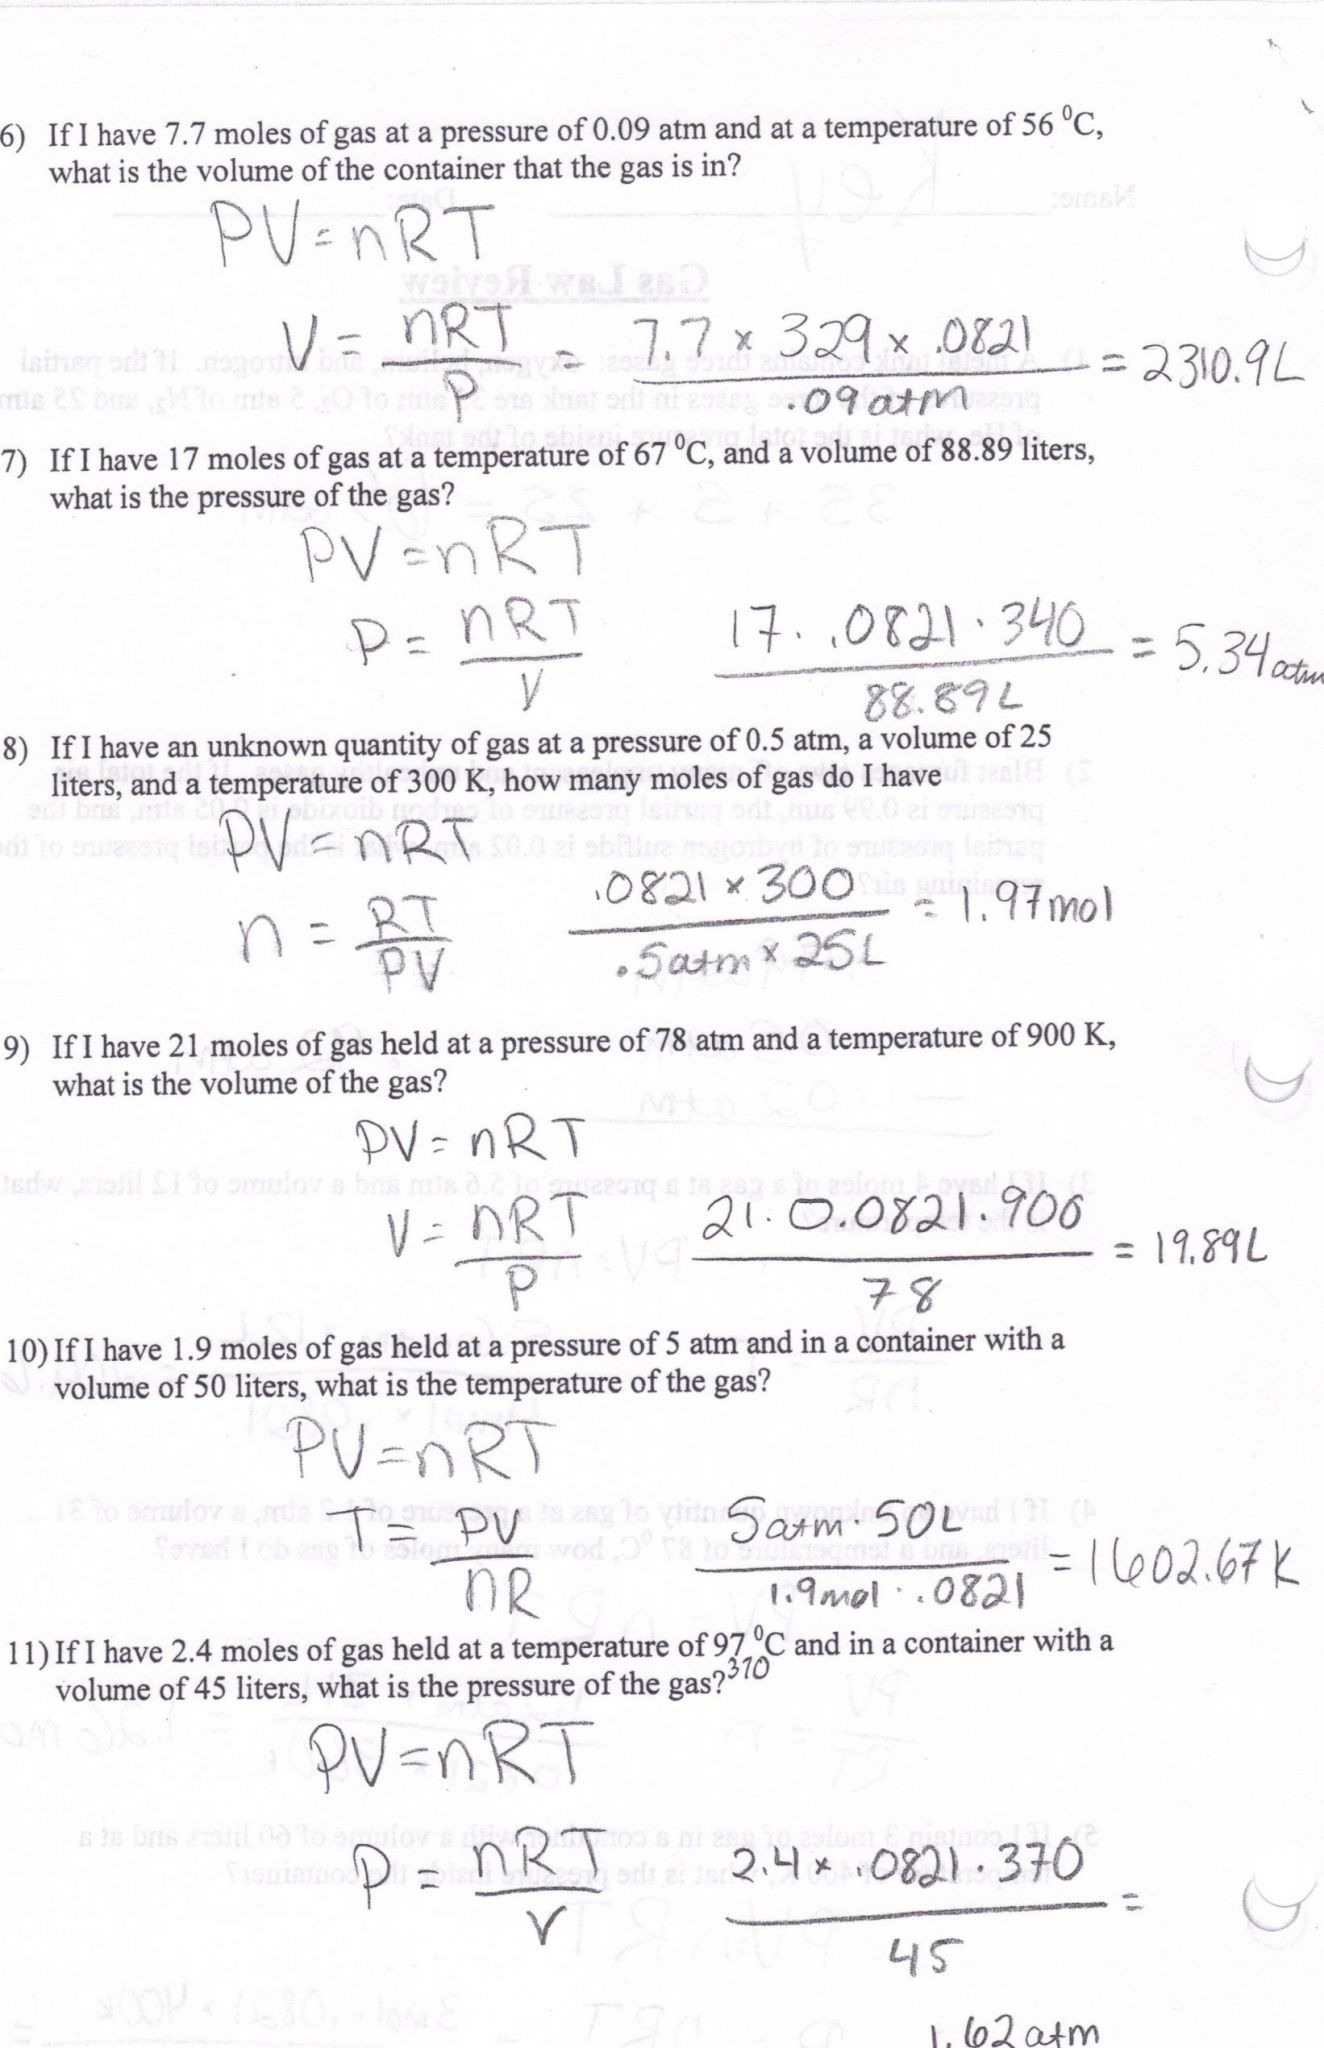 Ideal Gas Law Worksheet